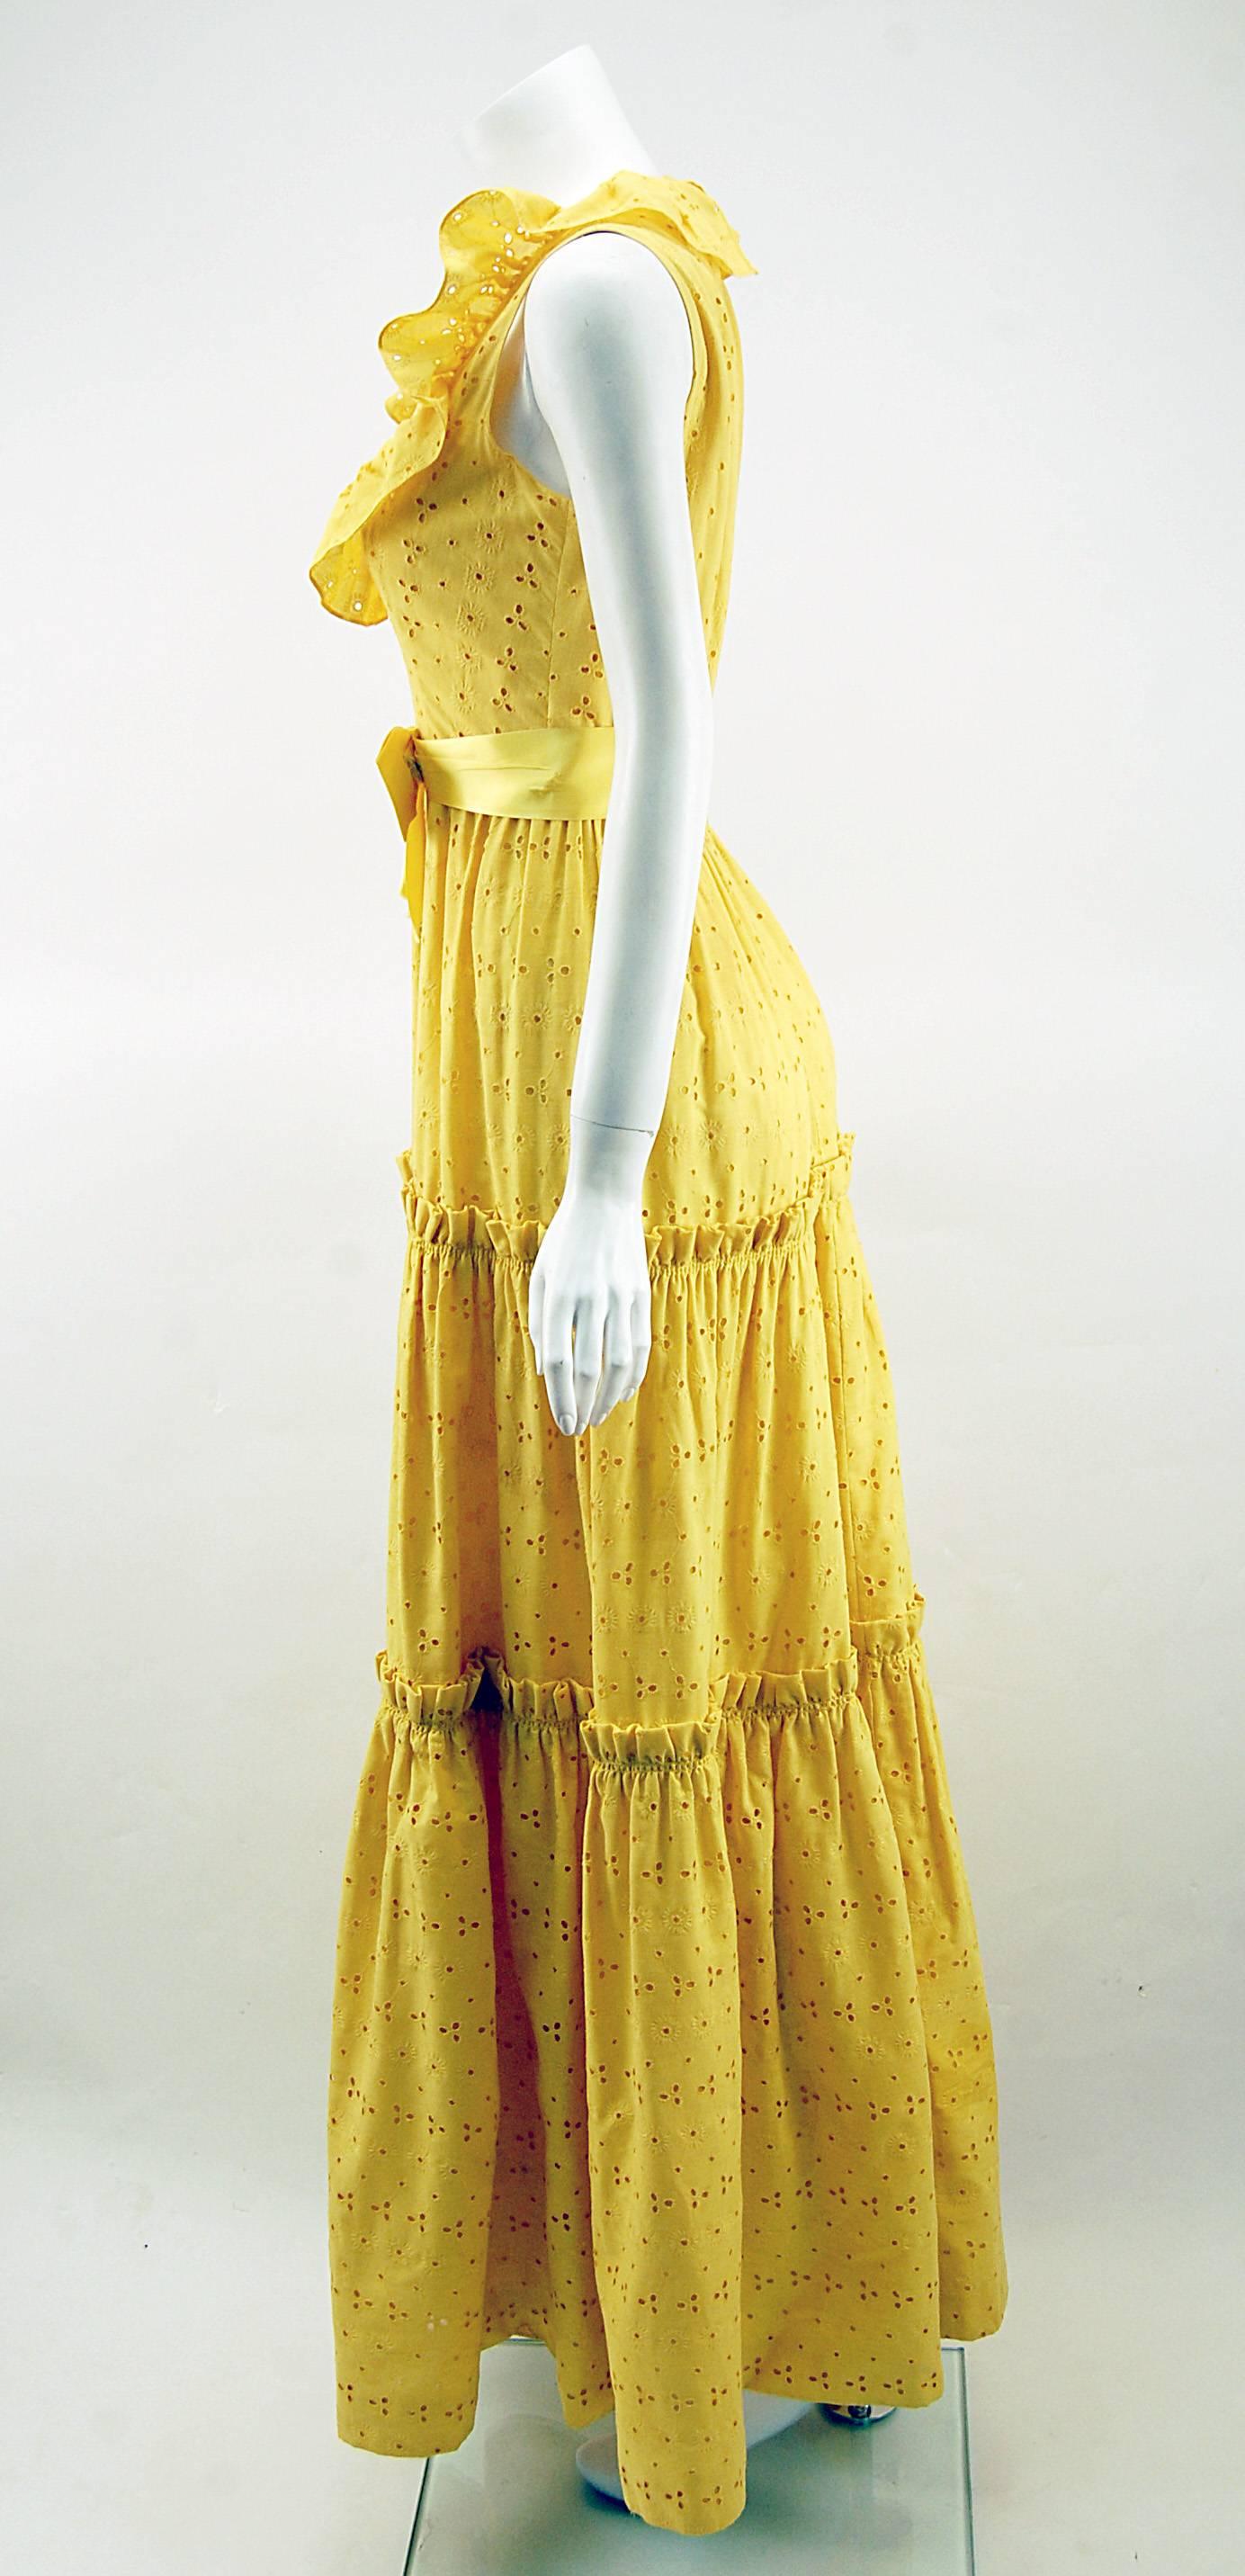 Adorable yellow summer dress by Mollie Parnis. The neckline is cut deep with a ruffle all the way around. Fitted bodice gives way to a three tiered gathered skirt that hits the floor. Sweet silk satin attached, yellow waist band and bow. The fabric